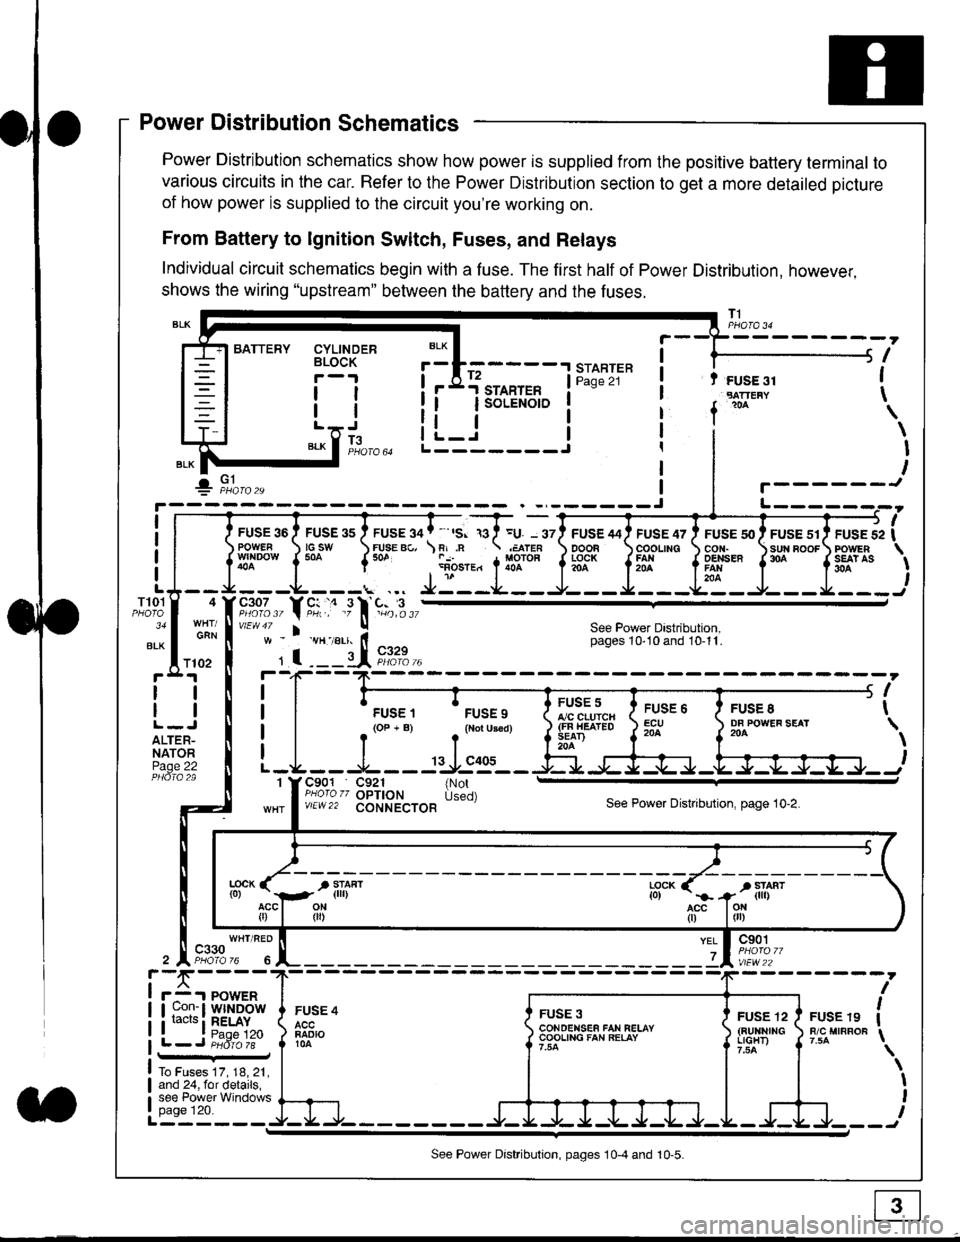 HONDA CIVIC 1998 6.G Workshop Manual Power Distribution Schematics
Power Distribution schematics show how power is supplied from the positive battery terminal to
various circuits in the car. Refer to the Power Distribution section to get